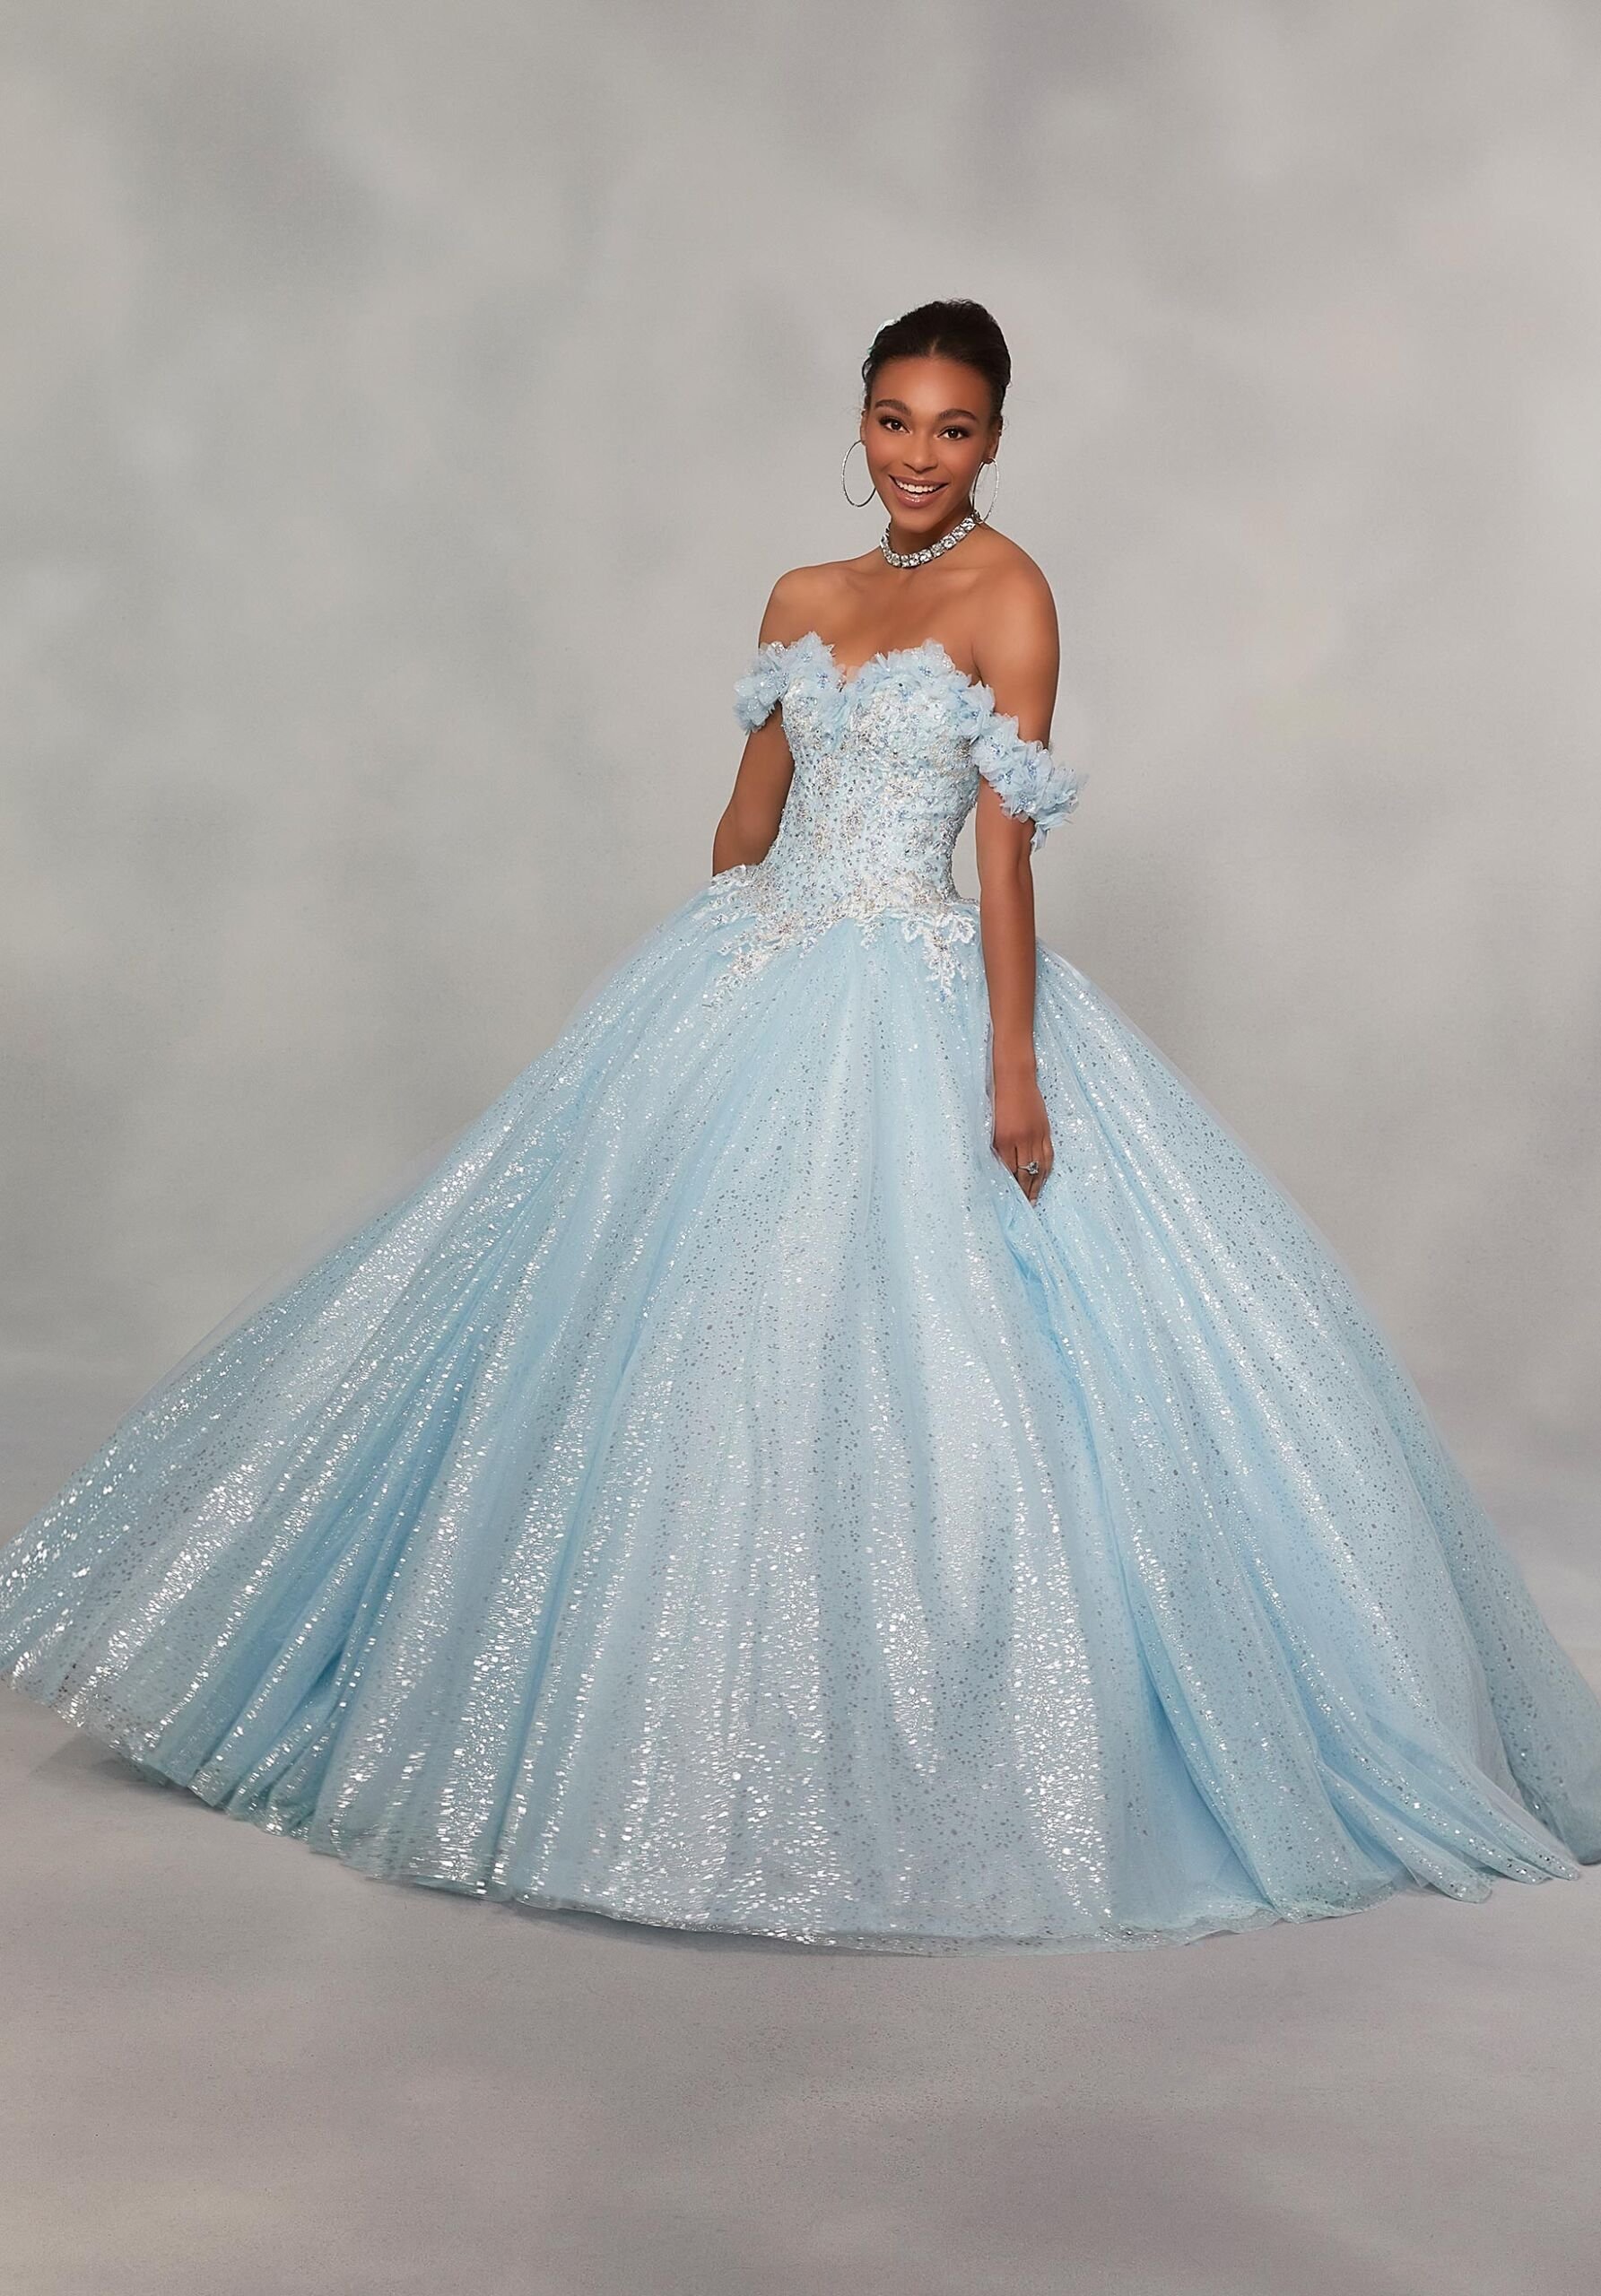 Morilee — Mis Quince | High Quality, Designer Formal Gowns